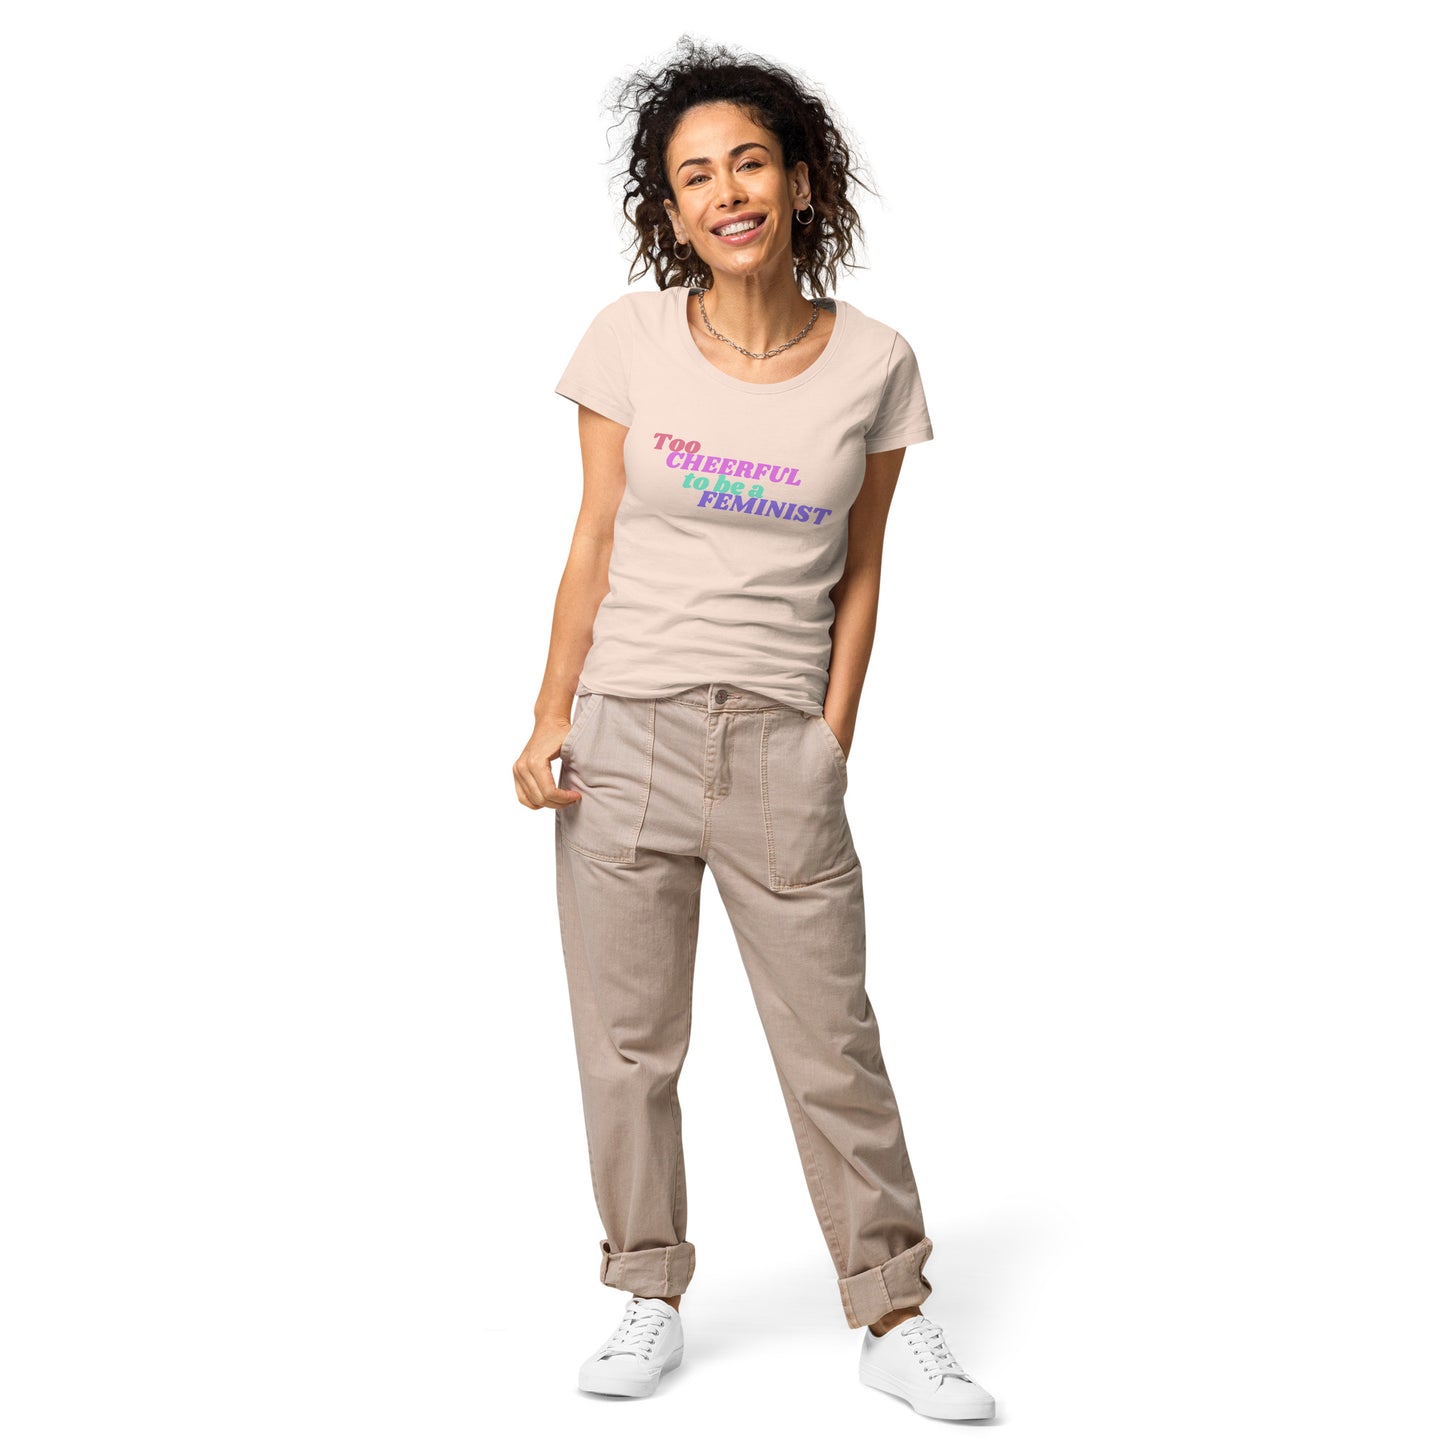 Too Cheerful To Be A Feminist | T-Shirt